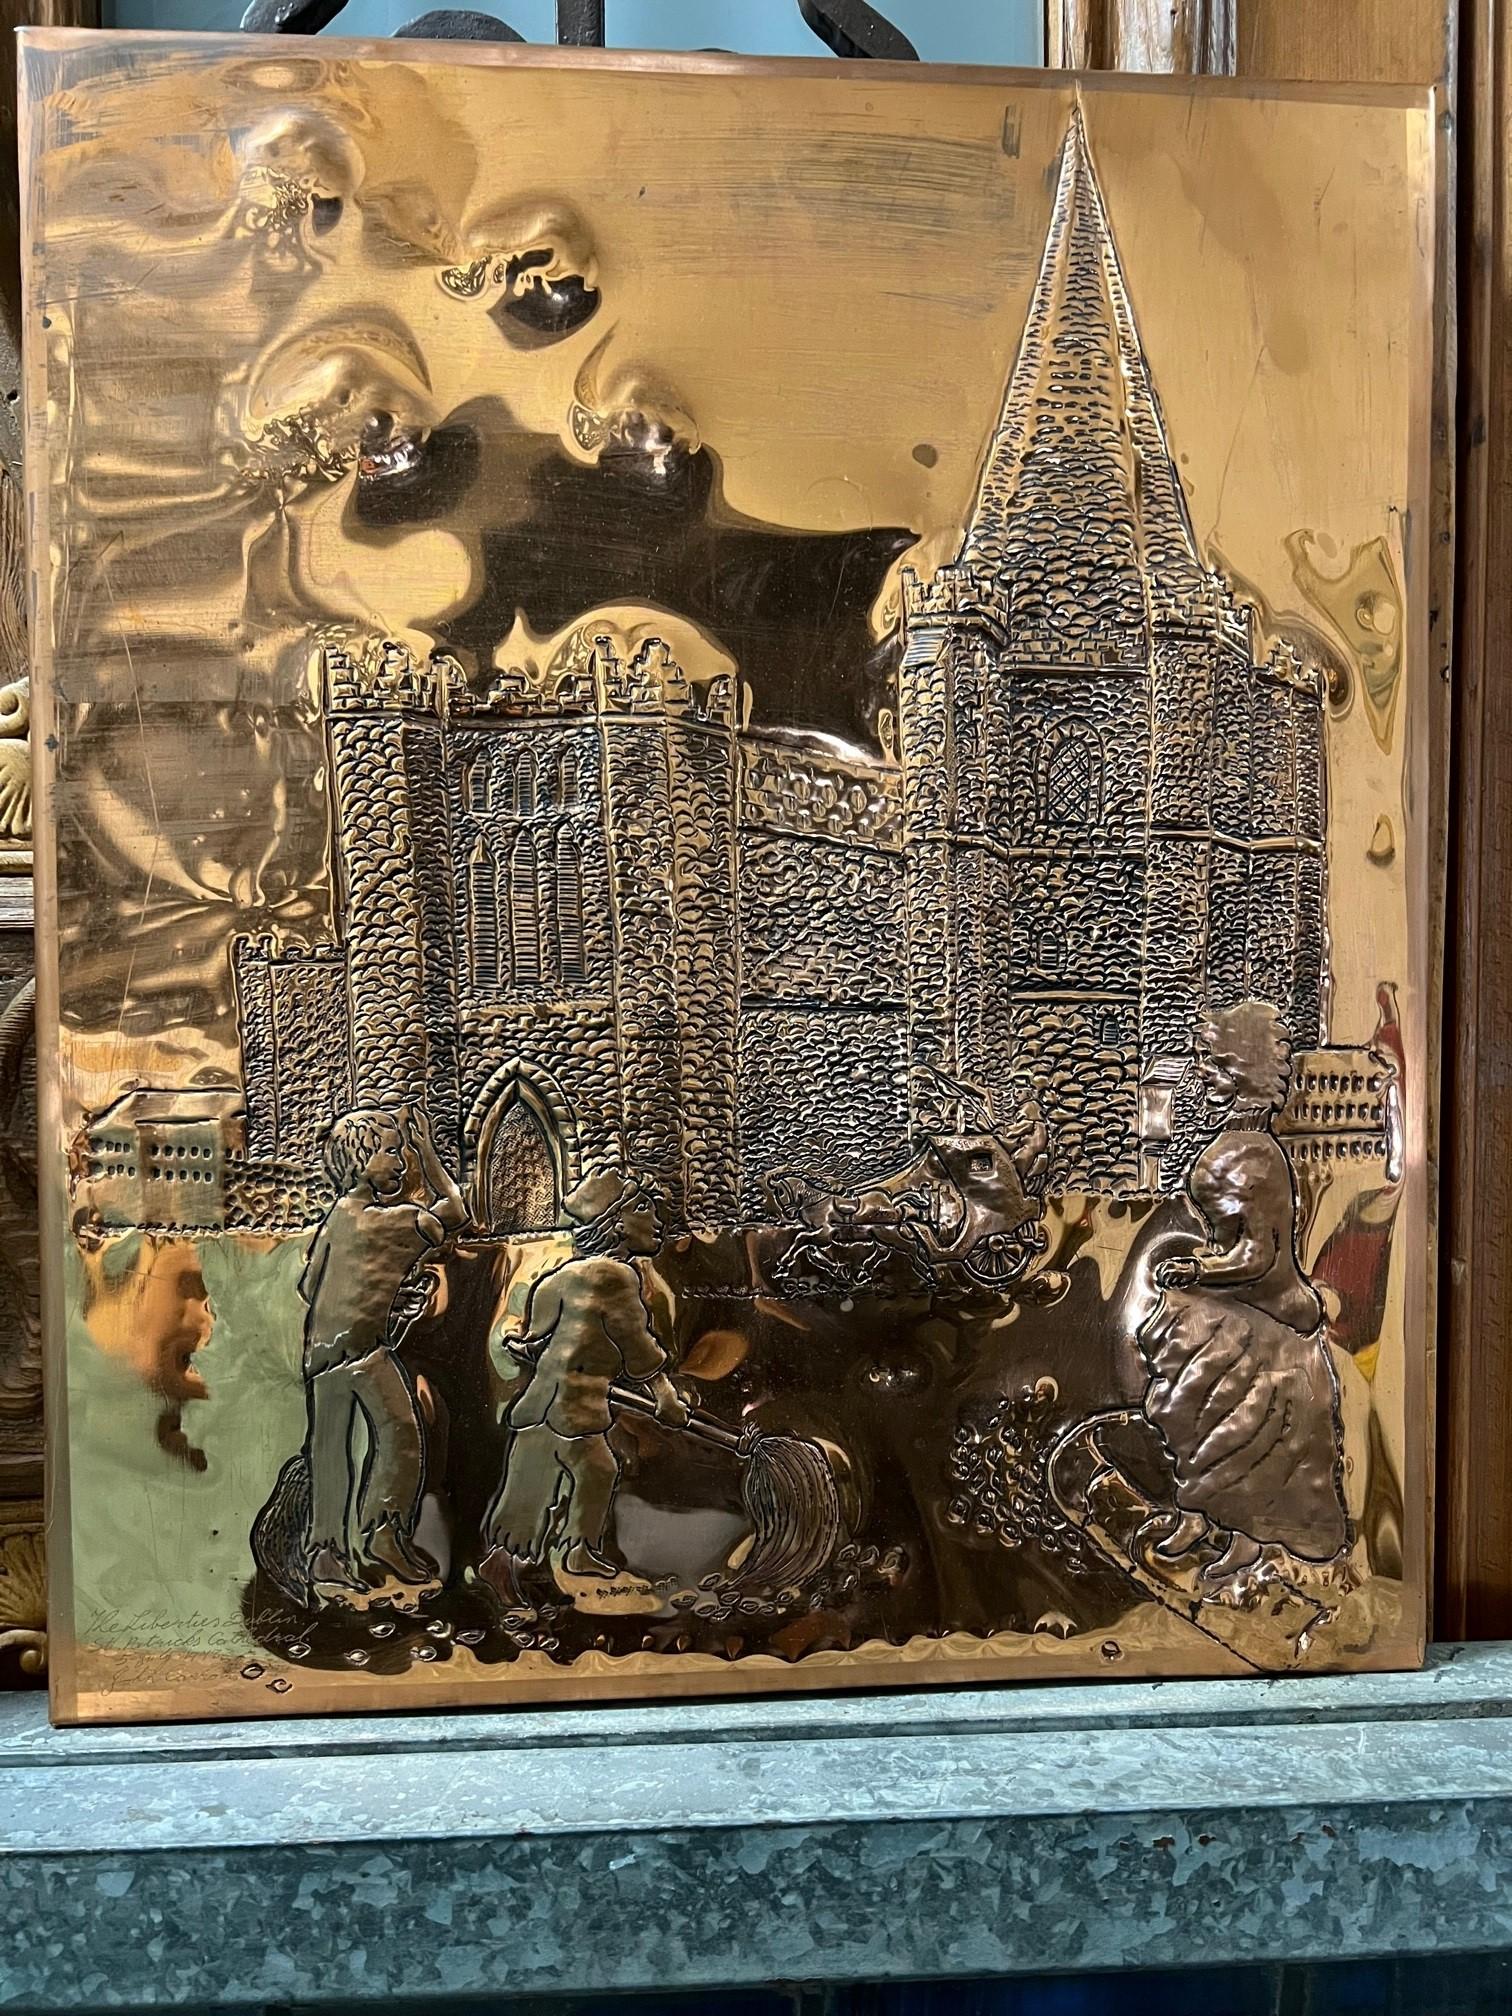 Late 20th Century hand hammered copper panel of Saint Patricks Cathedral in The Liberties, Dublin Ireland. Saint Patricks in Dublin was founded in the year 1191 as a Roman Catholic cathedral of the Church of Ireland. Since 1870 it has been